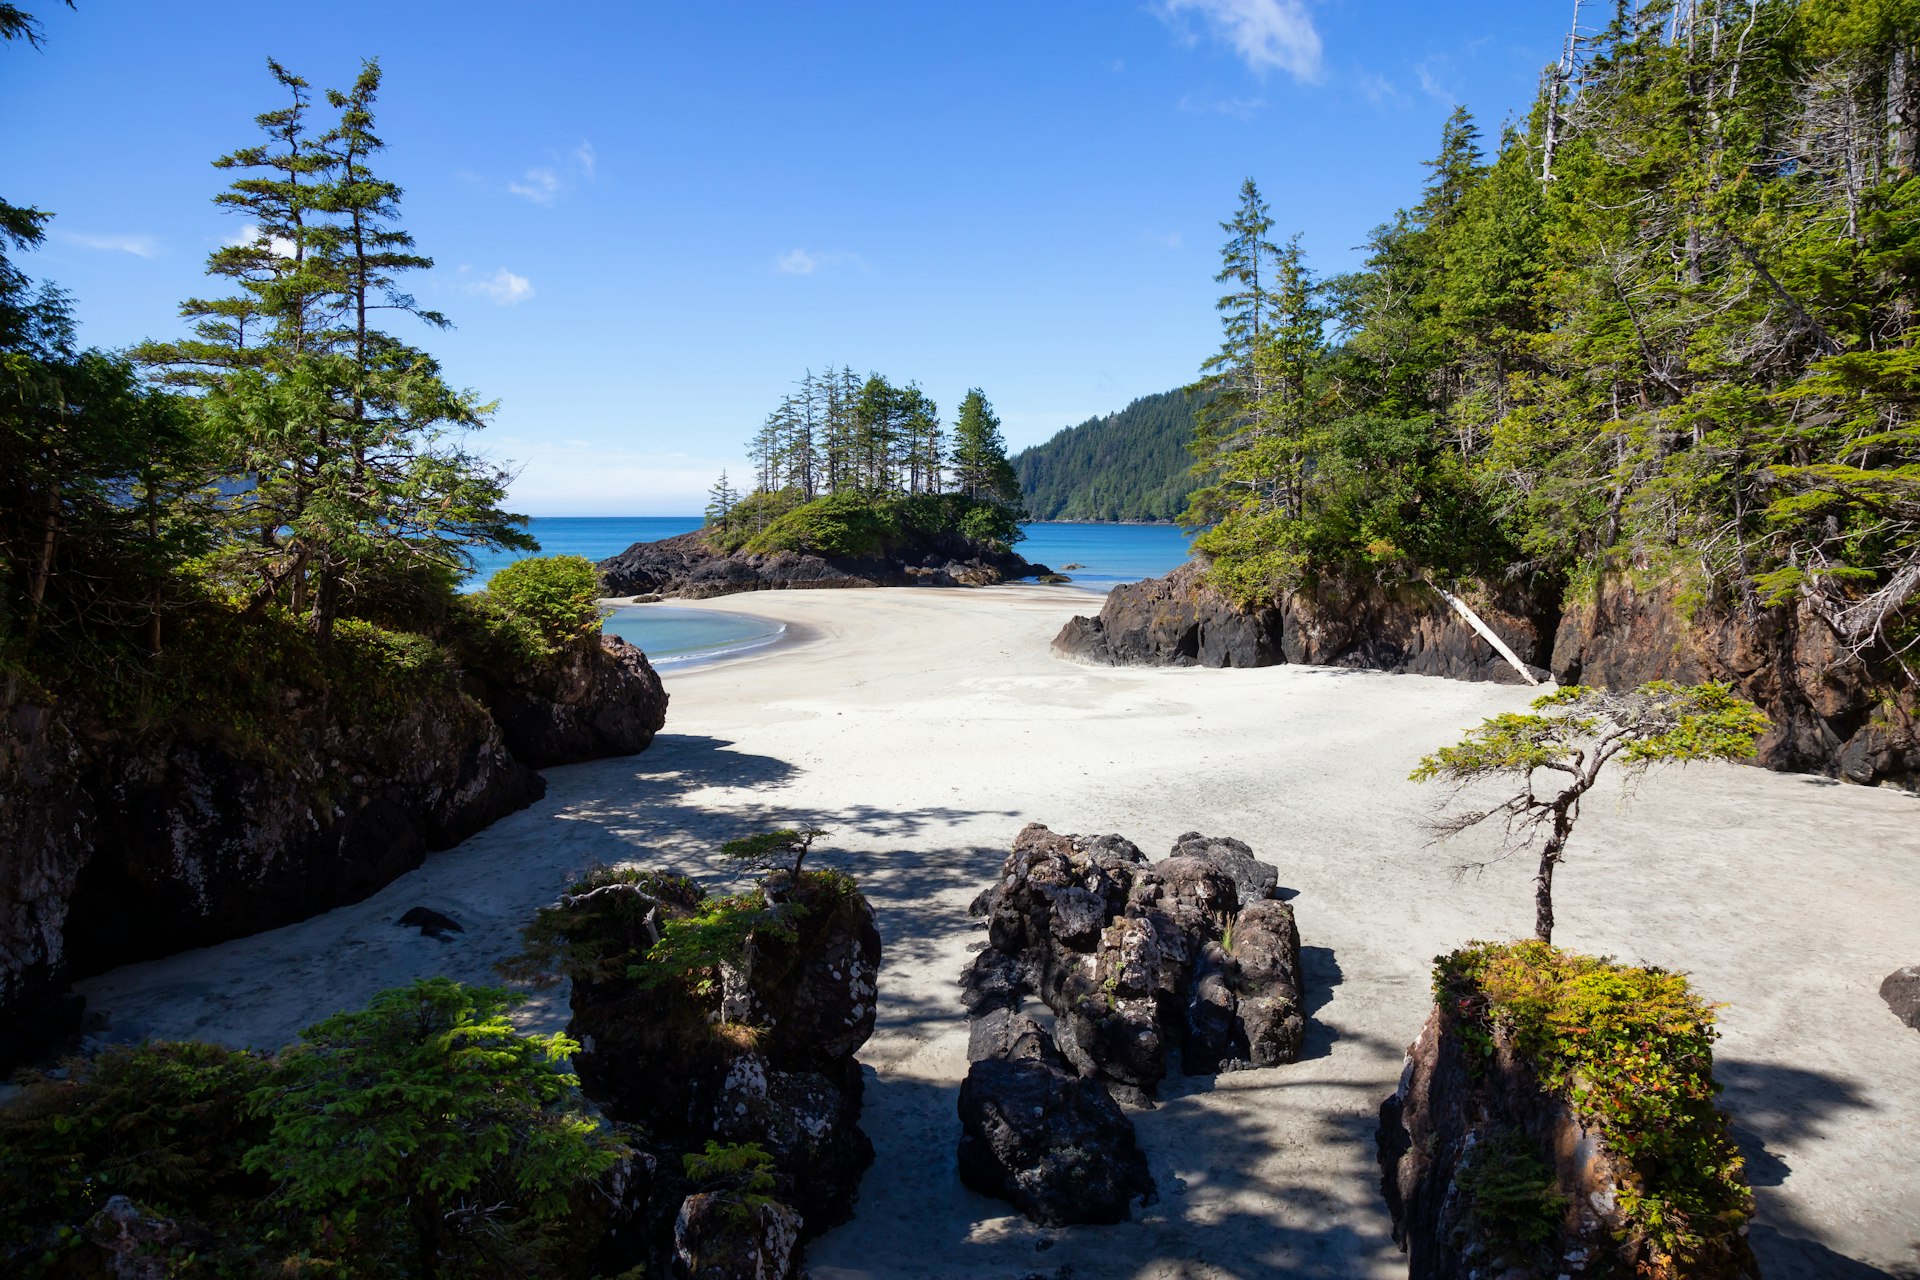 A beach surrounded by rocks and pine trees, San Josef Bay, Cape Scott Provincial Park, Northern Vancouver Island, British Columbia, Canada